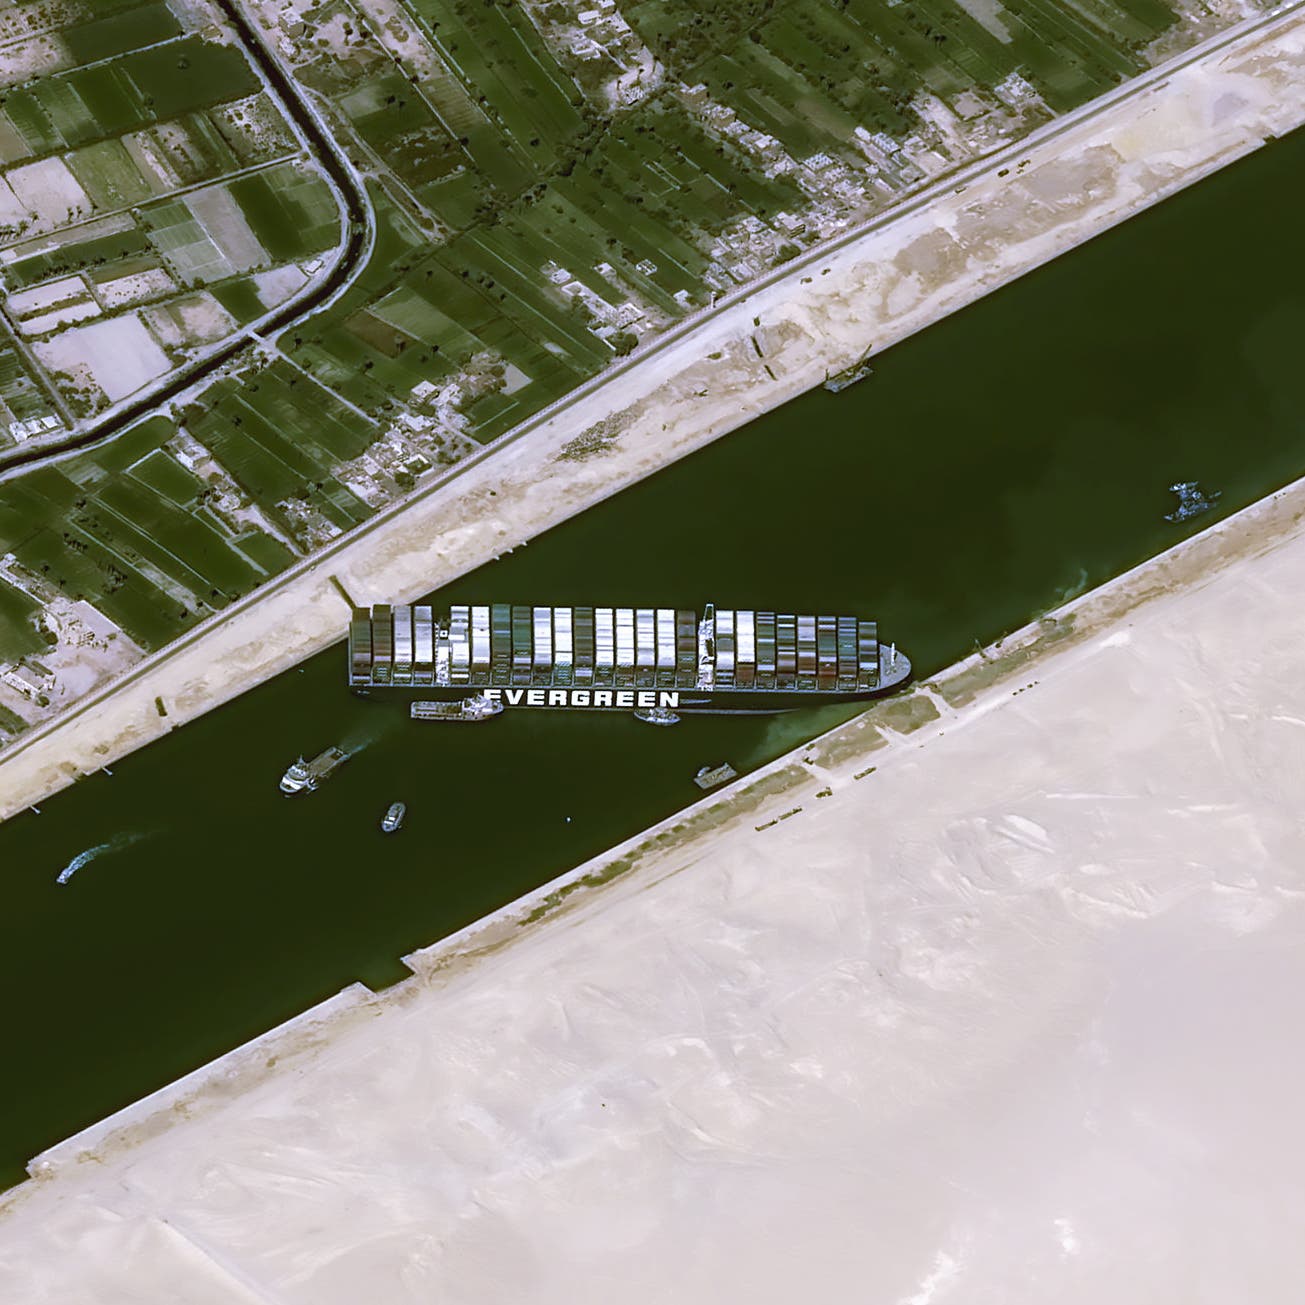 Strong winds not main reason for huge ship stranding in Suez Canal: Chairman